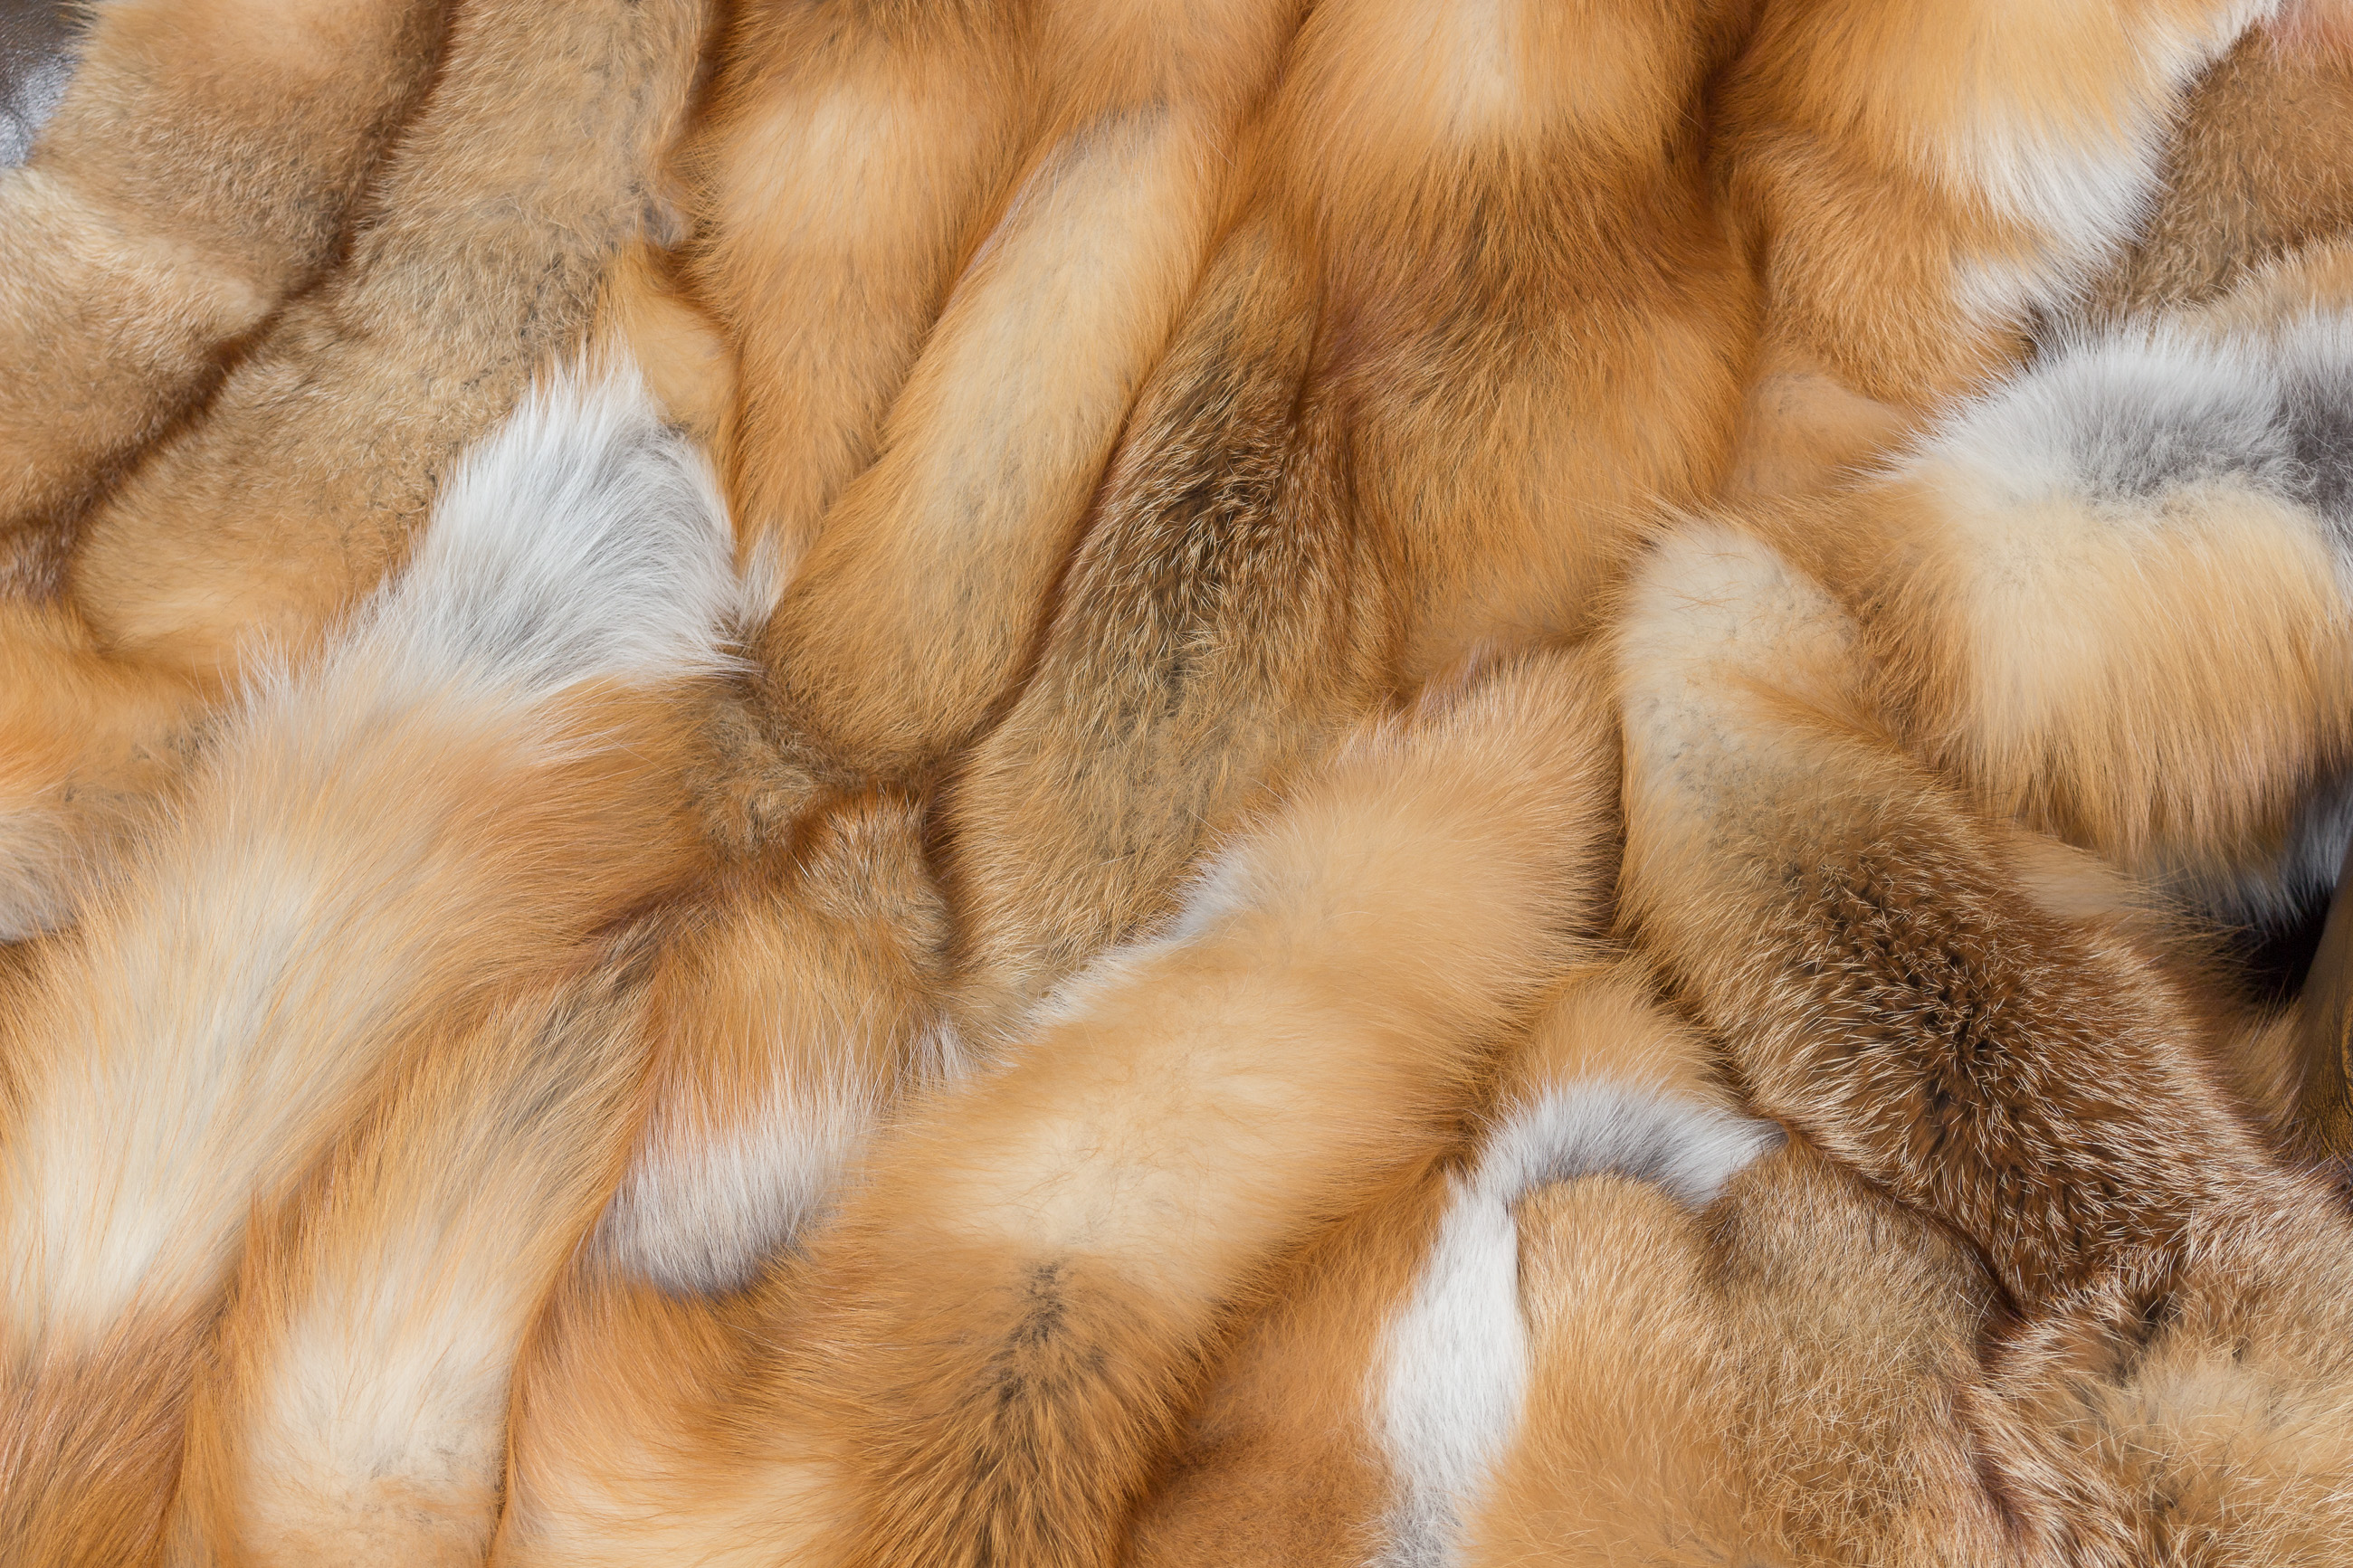 Canadian red fox fur blanket - classic style